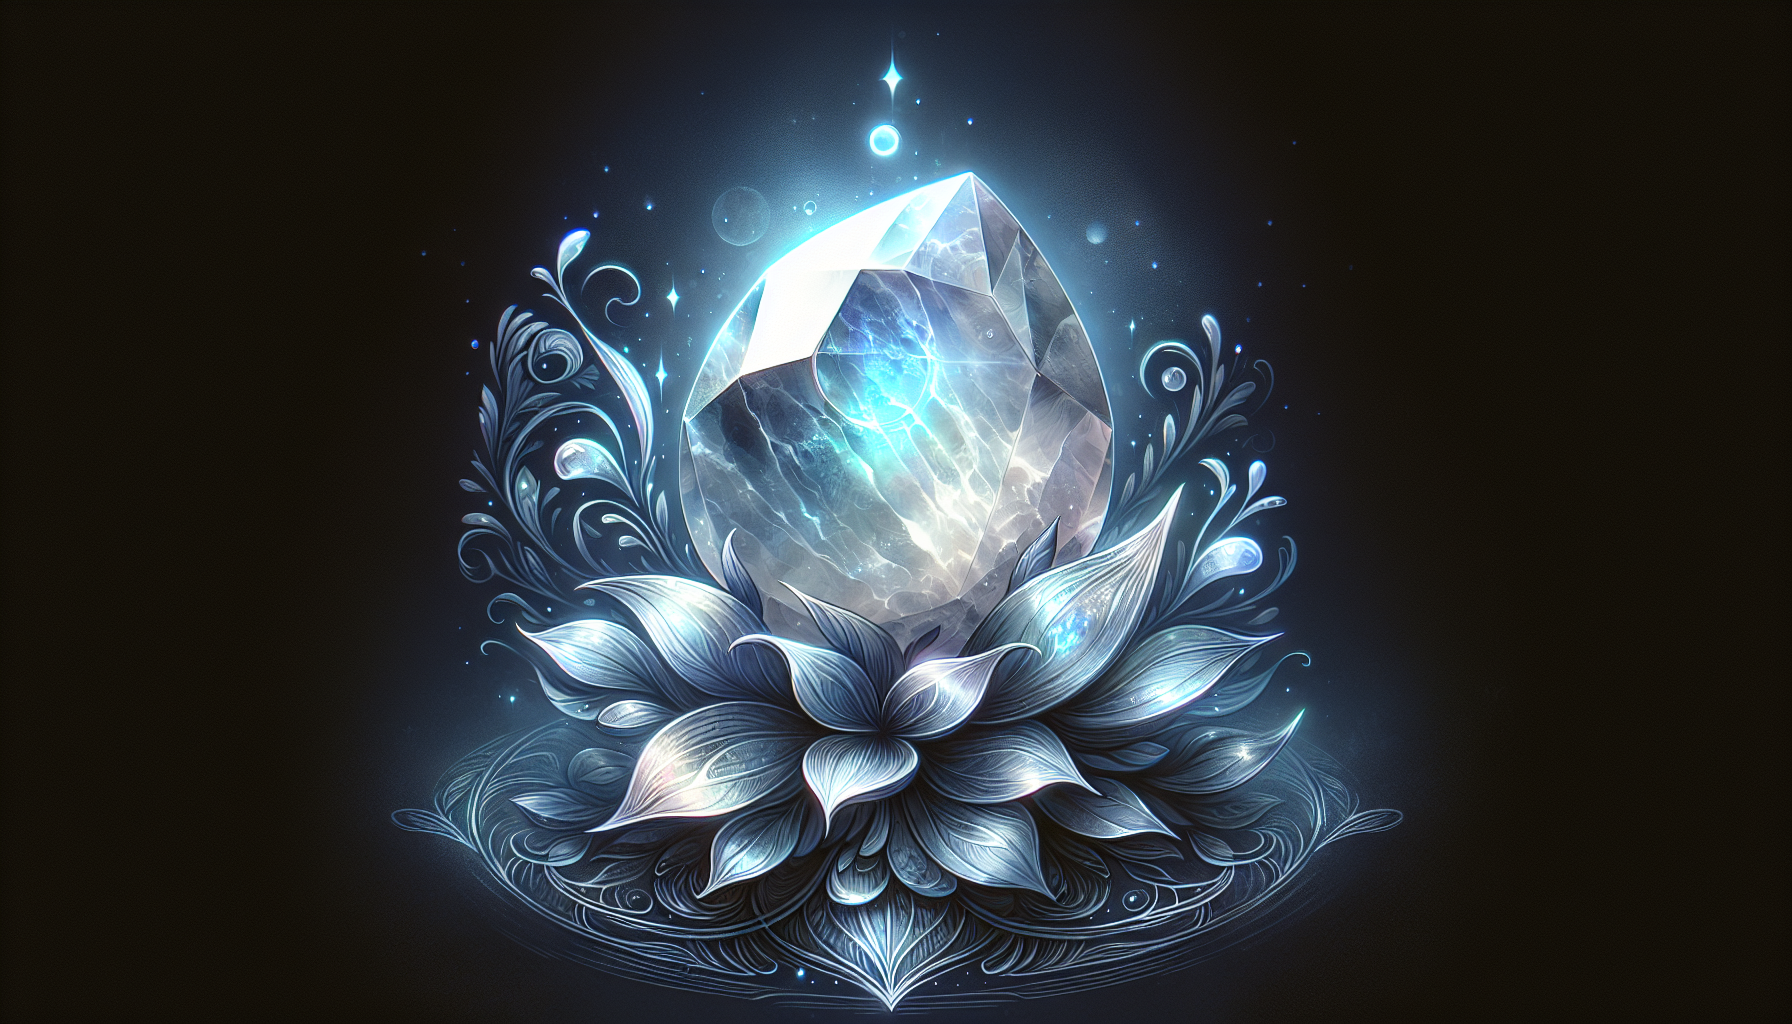 Illustration of a glowing moonstone representing lunar energy and feminine power